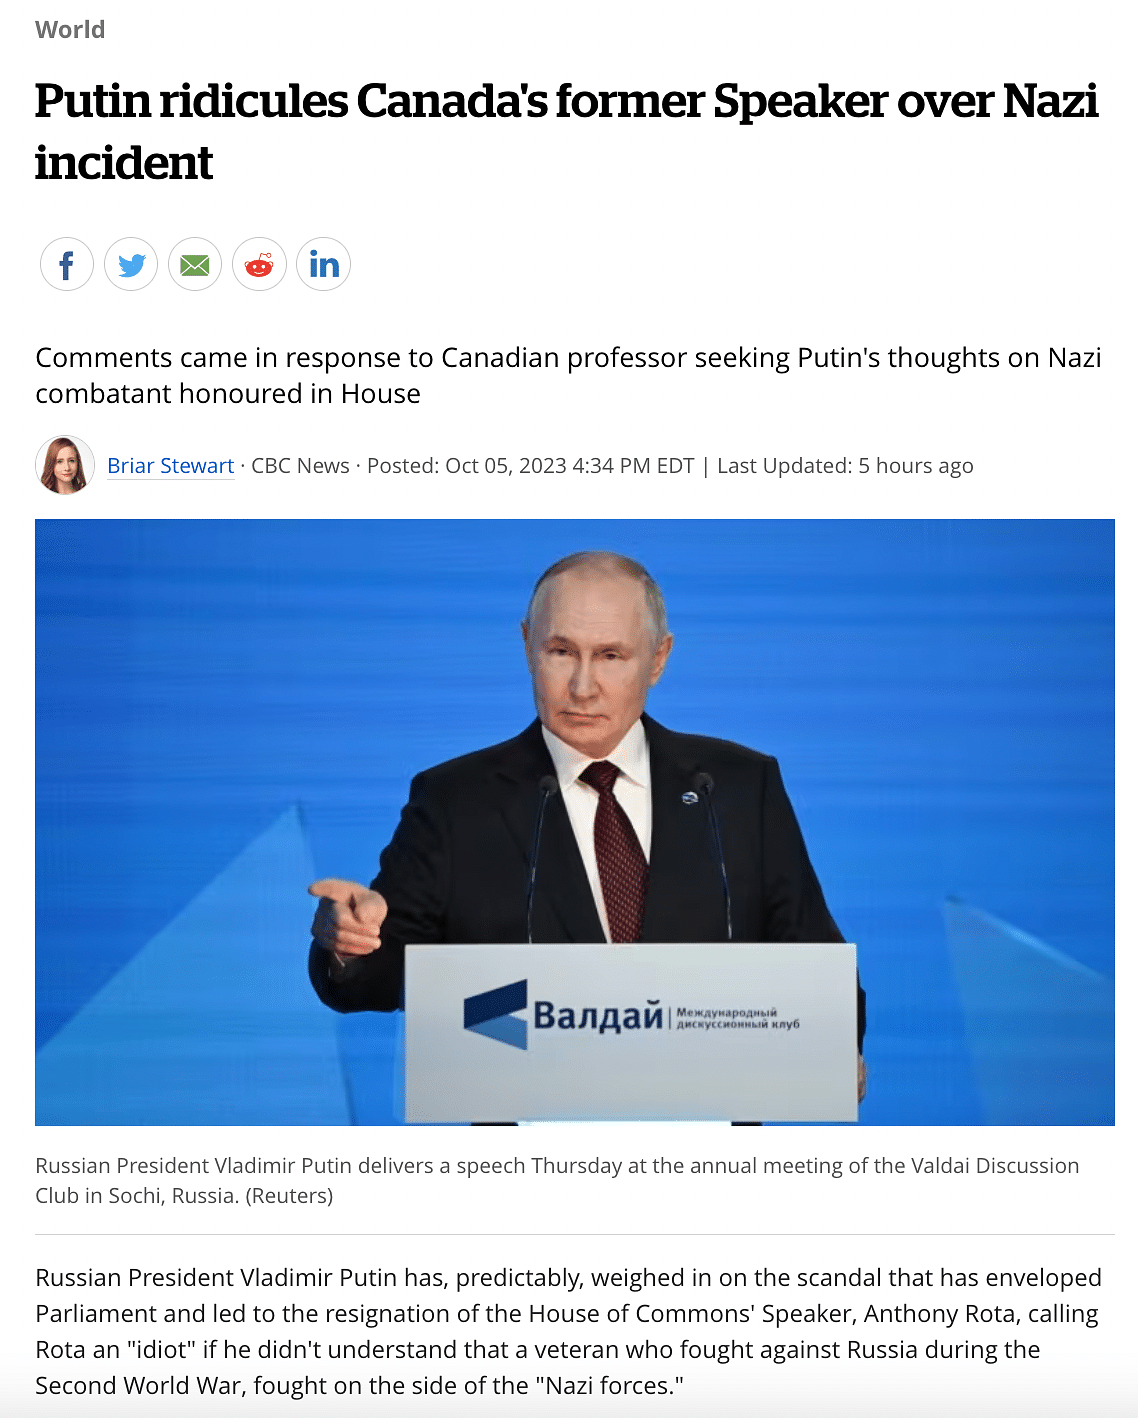 Putin called the Canadian parliament speaker, Antony Rota 'an idiot' for honouring a Nazi volunteer in the house. 